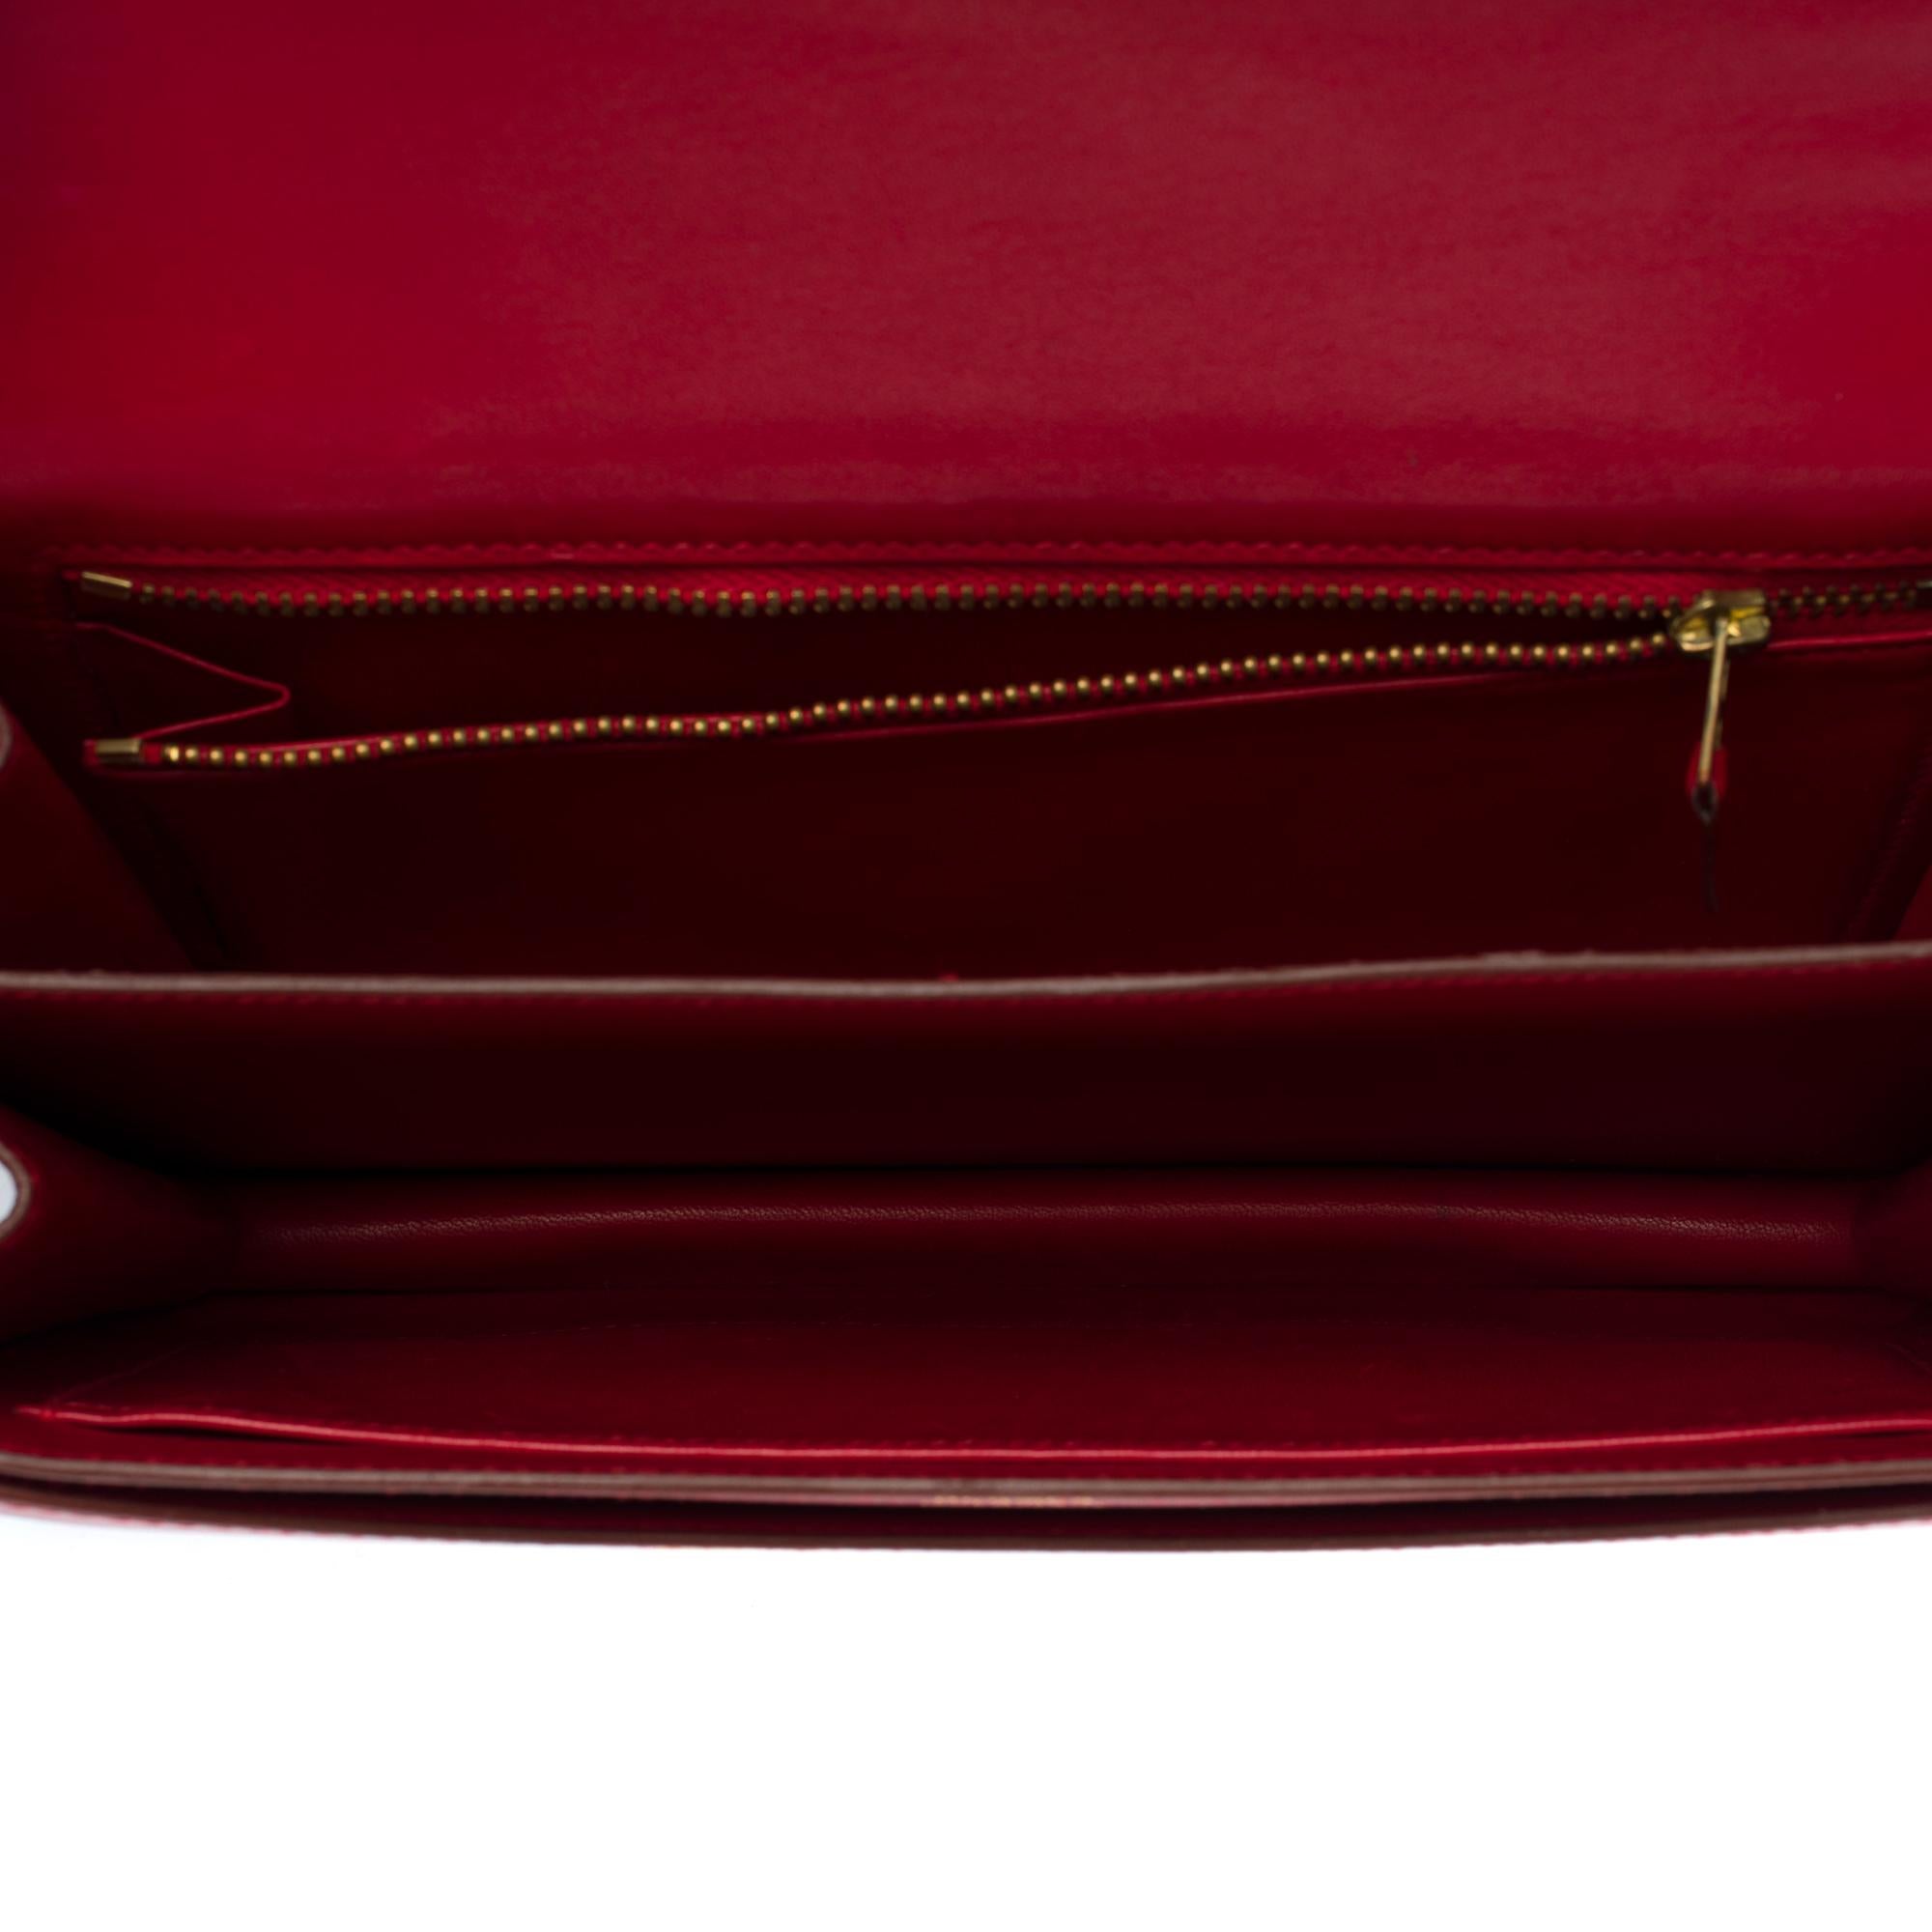 Stunning Hermes Constance 23 shoulder bag in Rouge H boxcalf leather, GHW For Sale 2